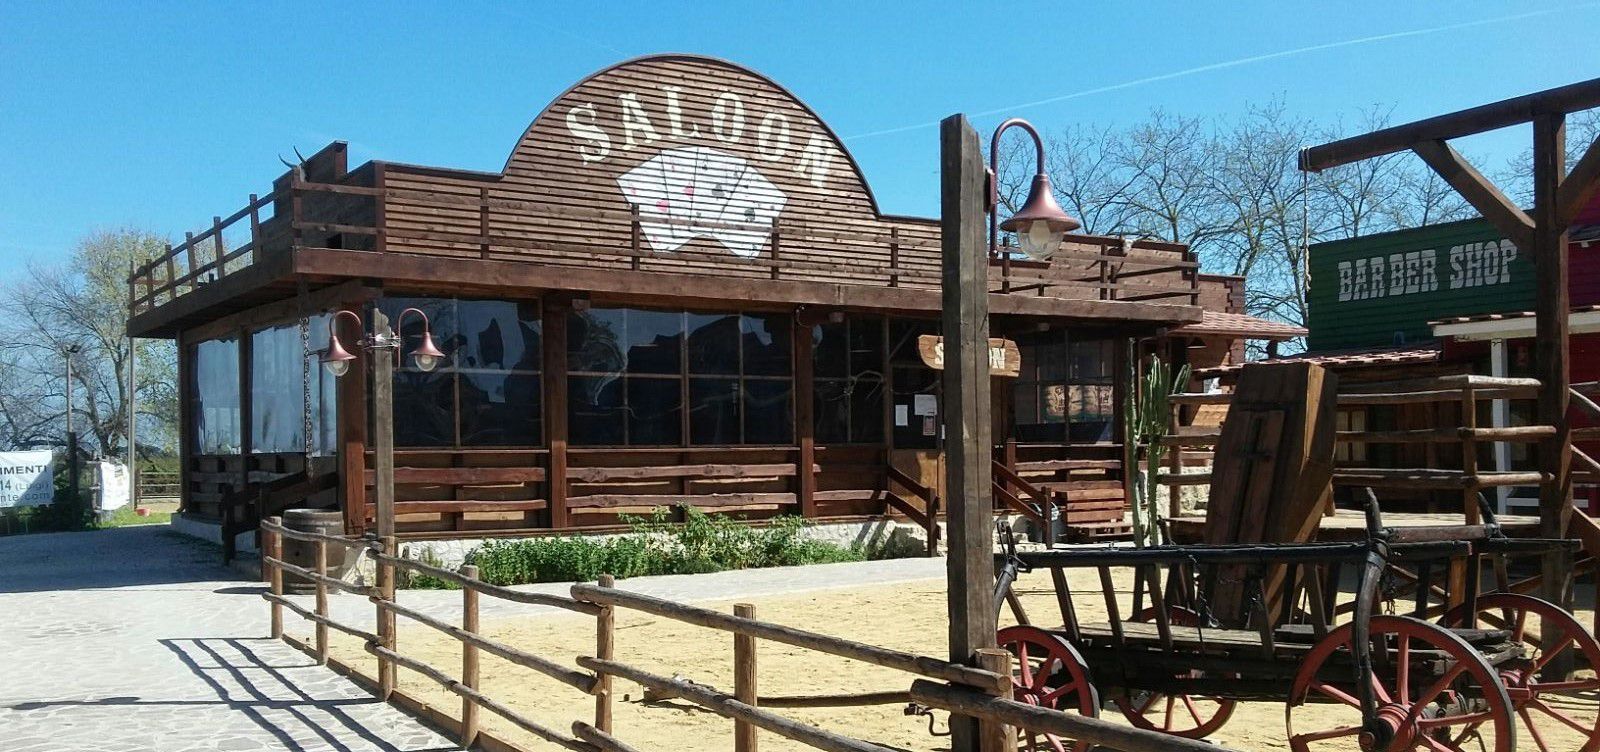 Hours 13:00-a snack in a true old West saloon!